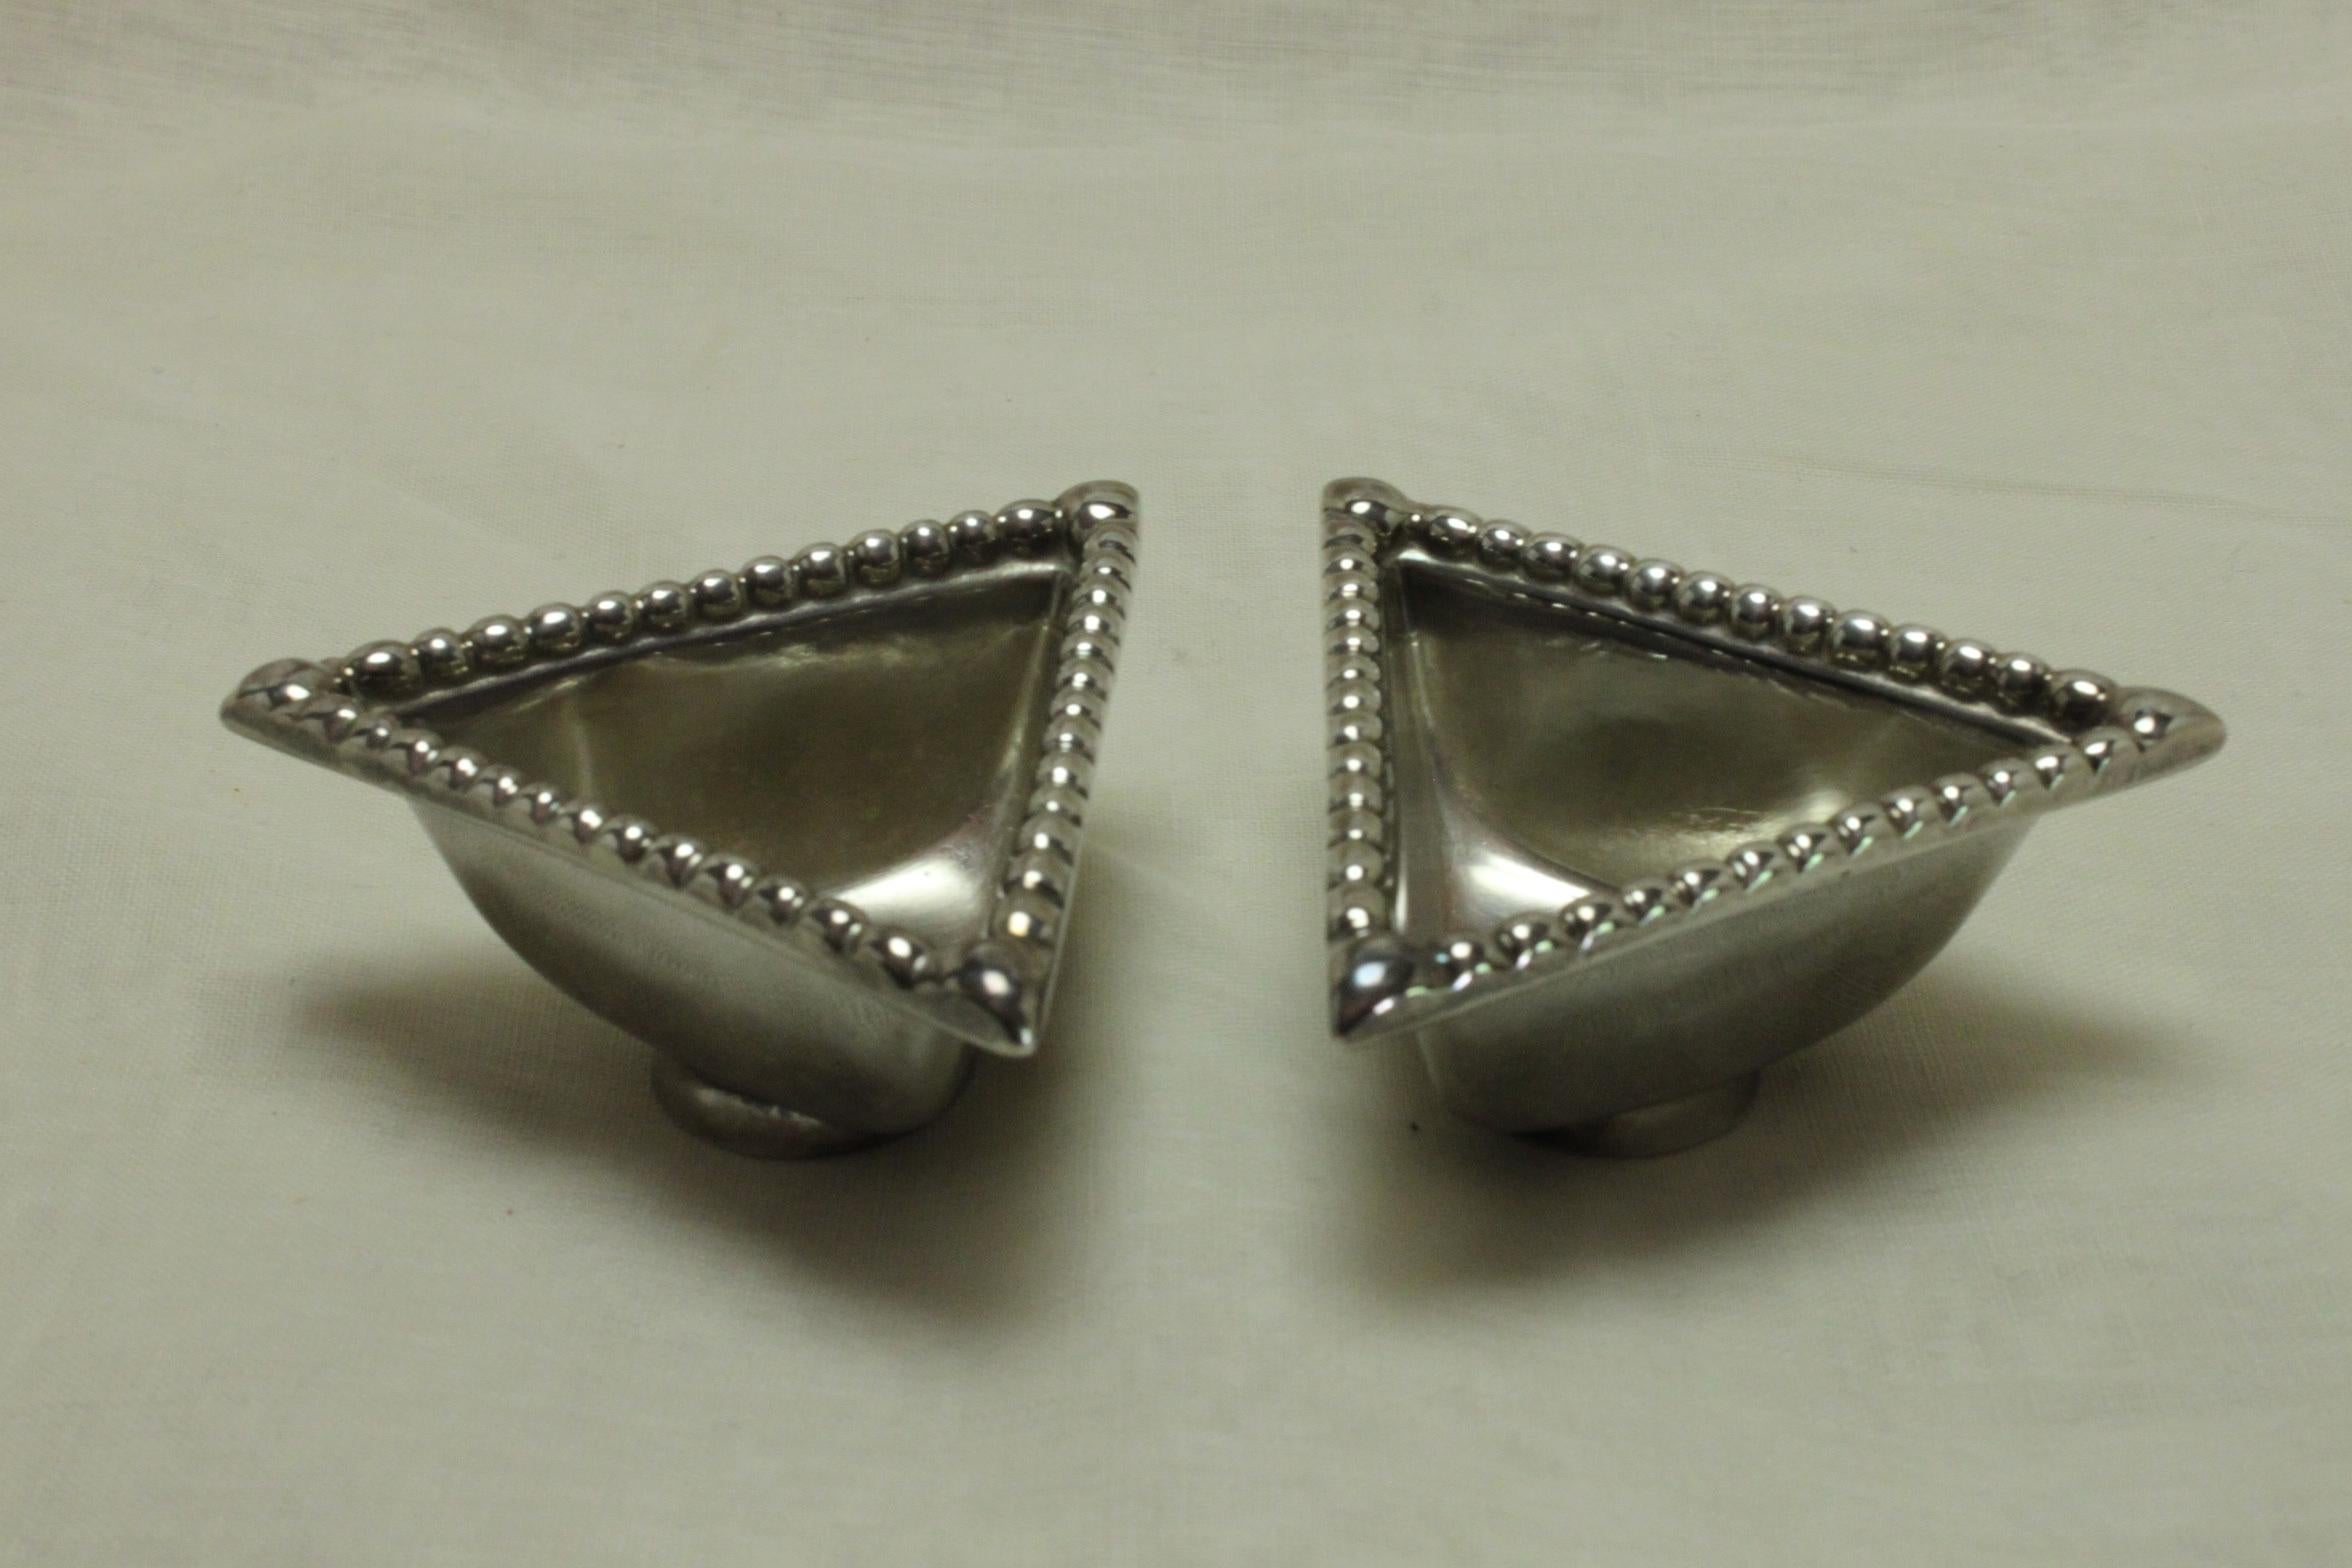 This boxed set of Traprain Law replica sterling silver salts and spoons was made by Brook and Son of Edinburgh in 1929. The triangular salts feature beaded moulding to the rim and stand on a circular foot. They measure 75 mm (3 inches) along each